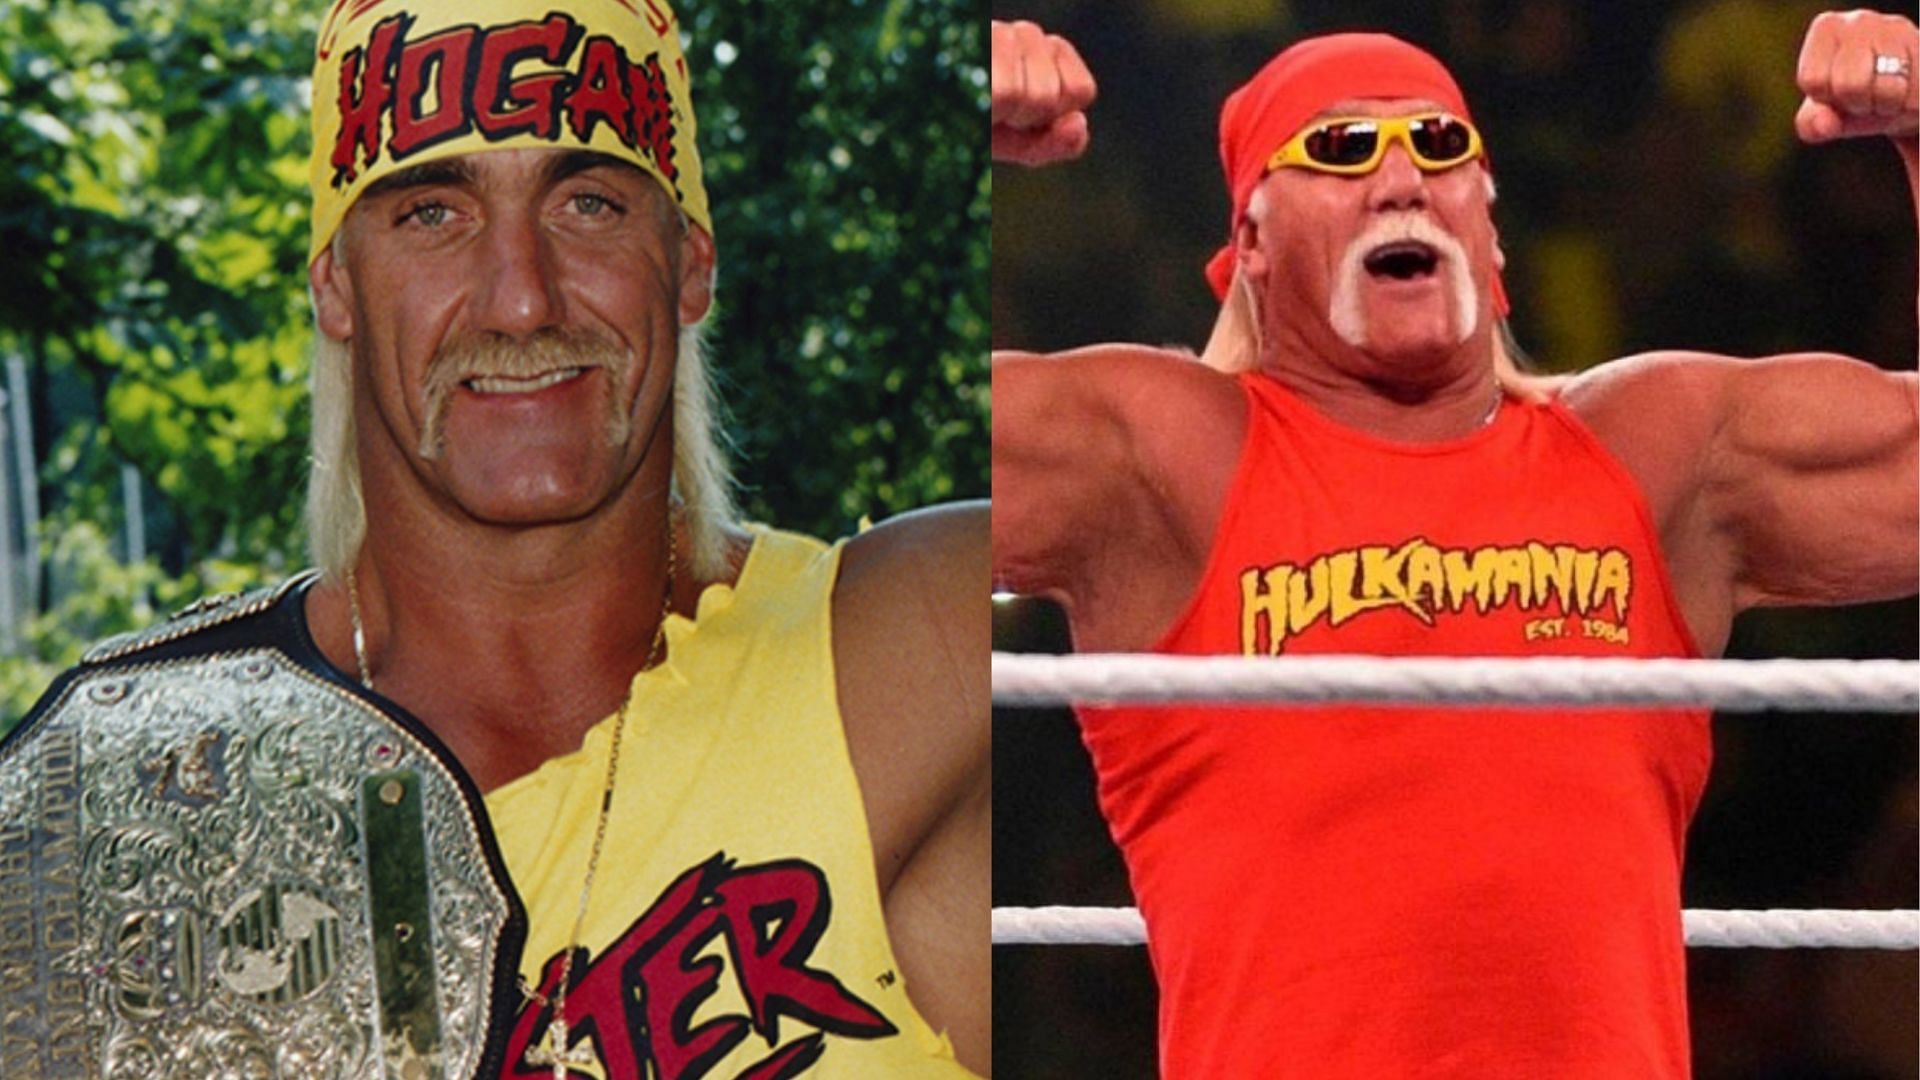 Why is Hulk Hogan's biopic at risk of being halted?